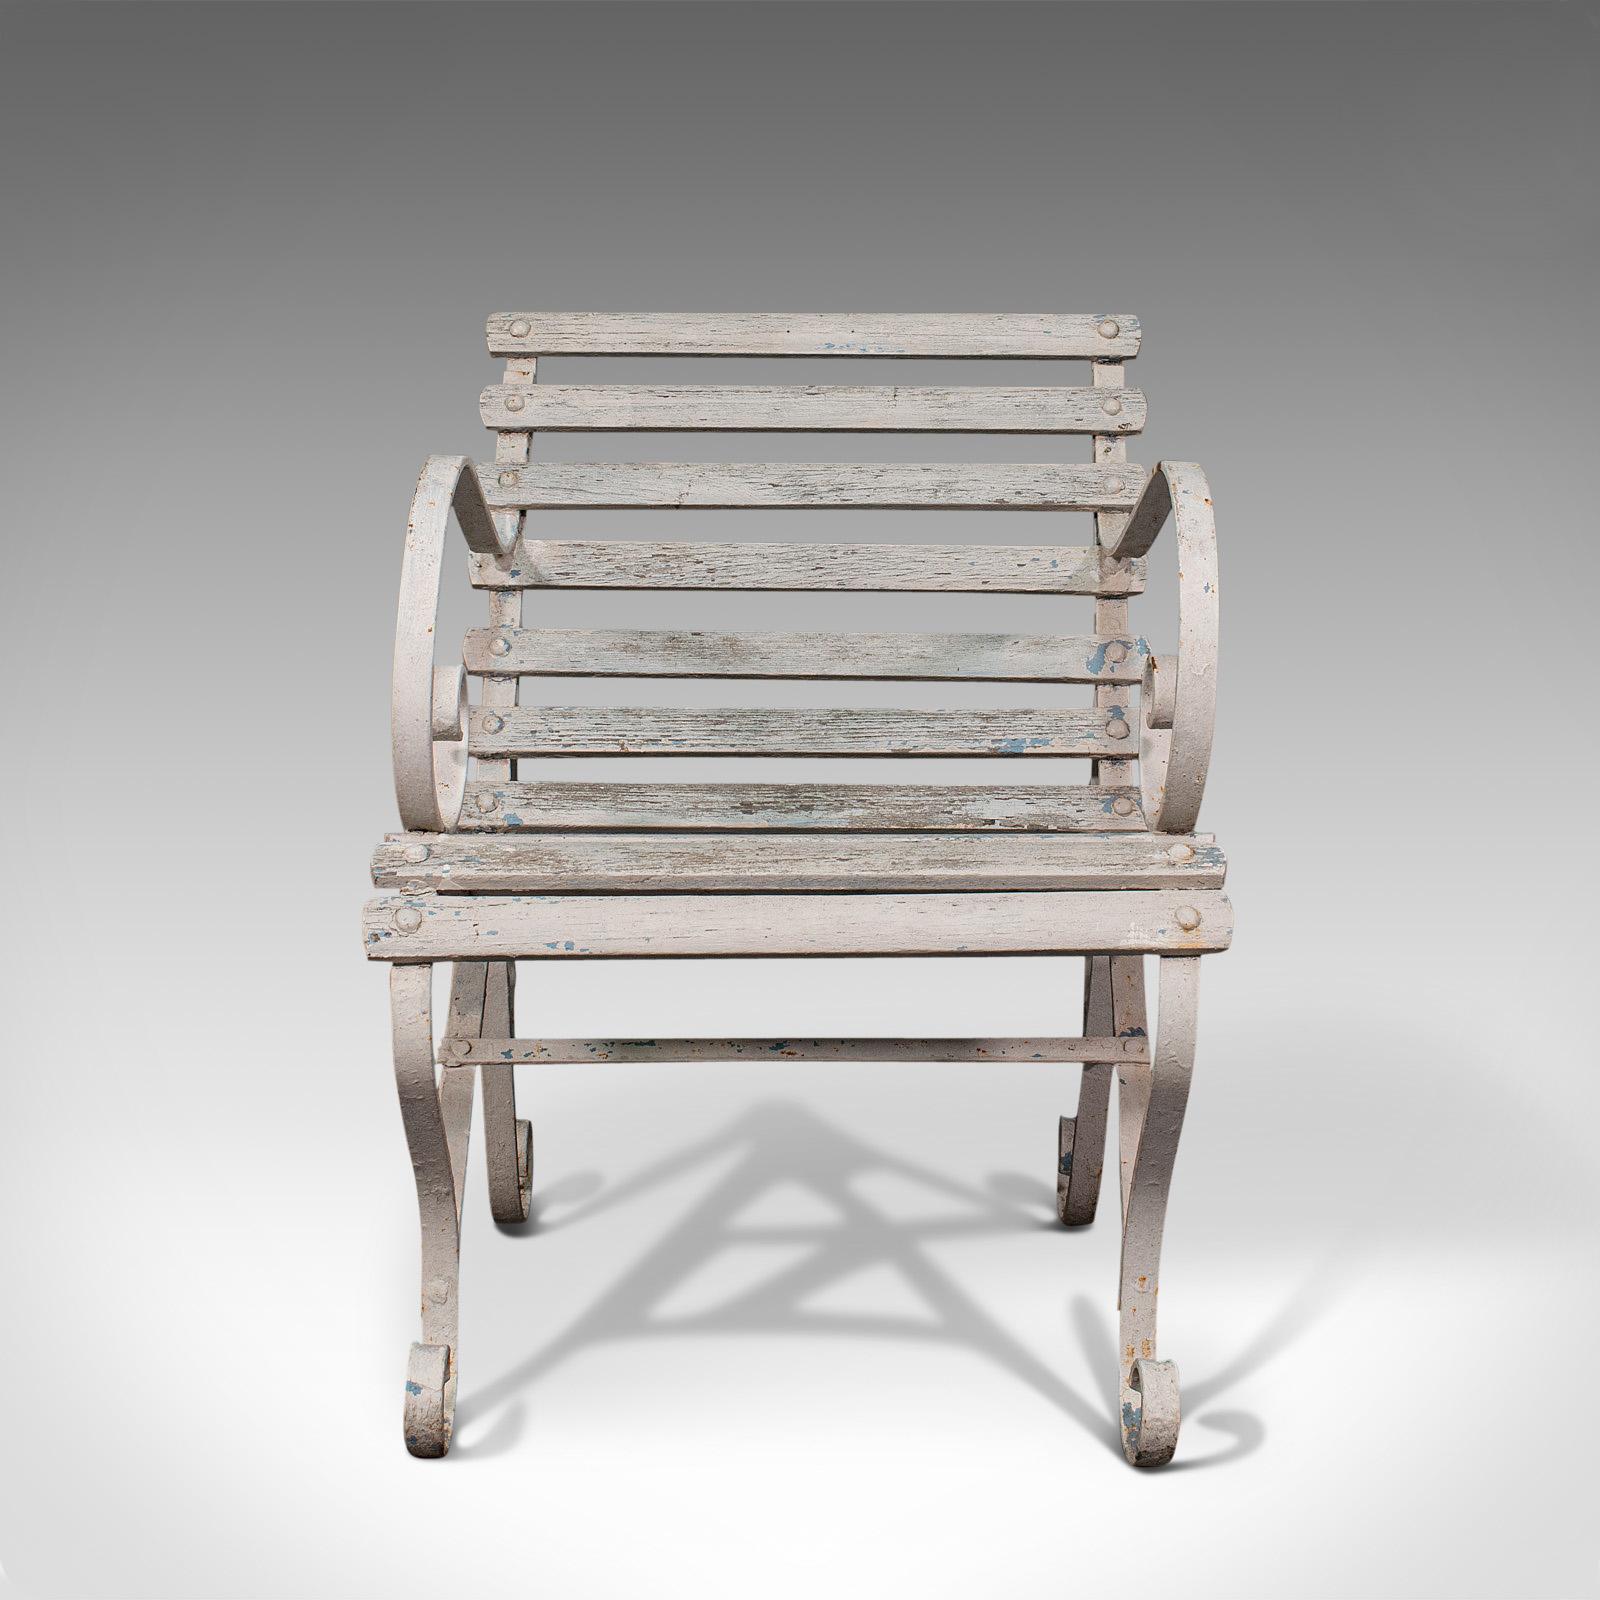 This is an antique garden seat. An English, wrought iron and wooden slatted outdoor chair, dating to the Victorian period, circa 1900.

Ornately scrolled forms a highlight of this appealing outdoor chair
Displays a desirable aged patina with